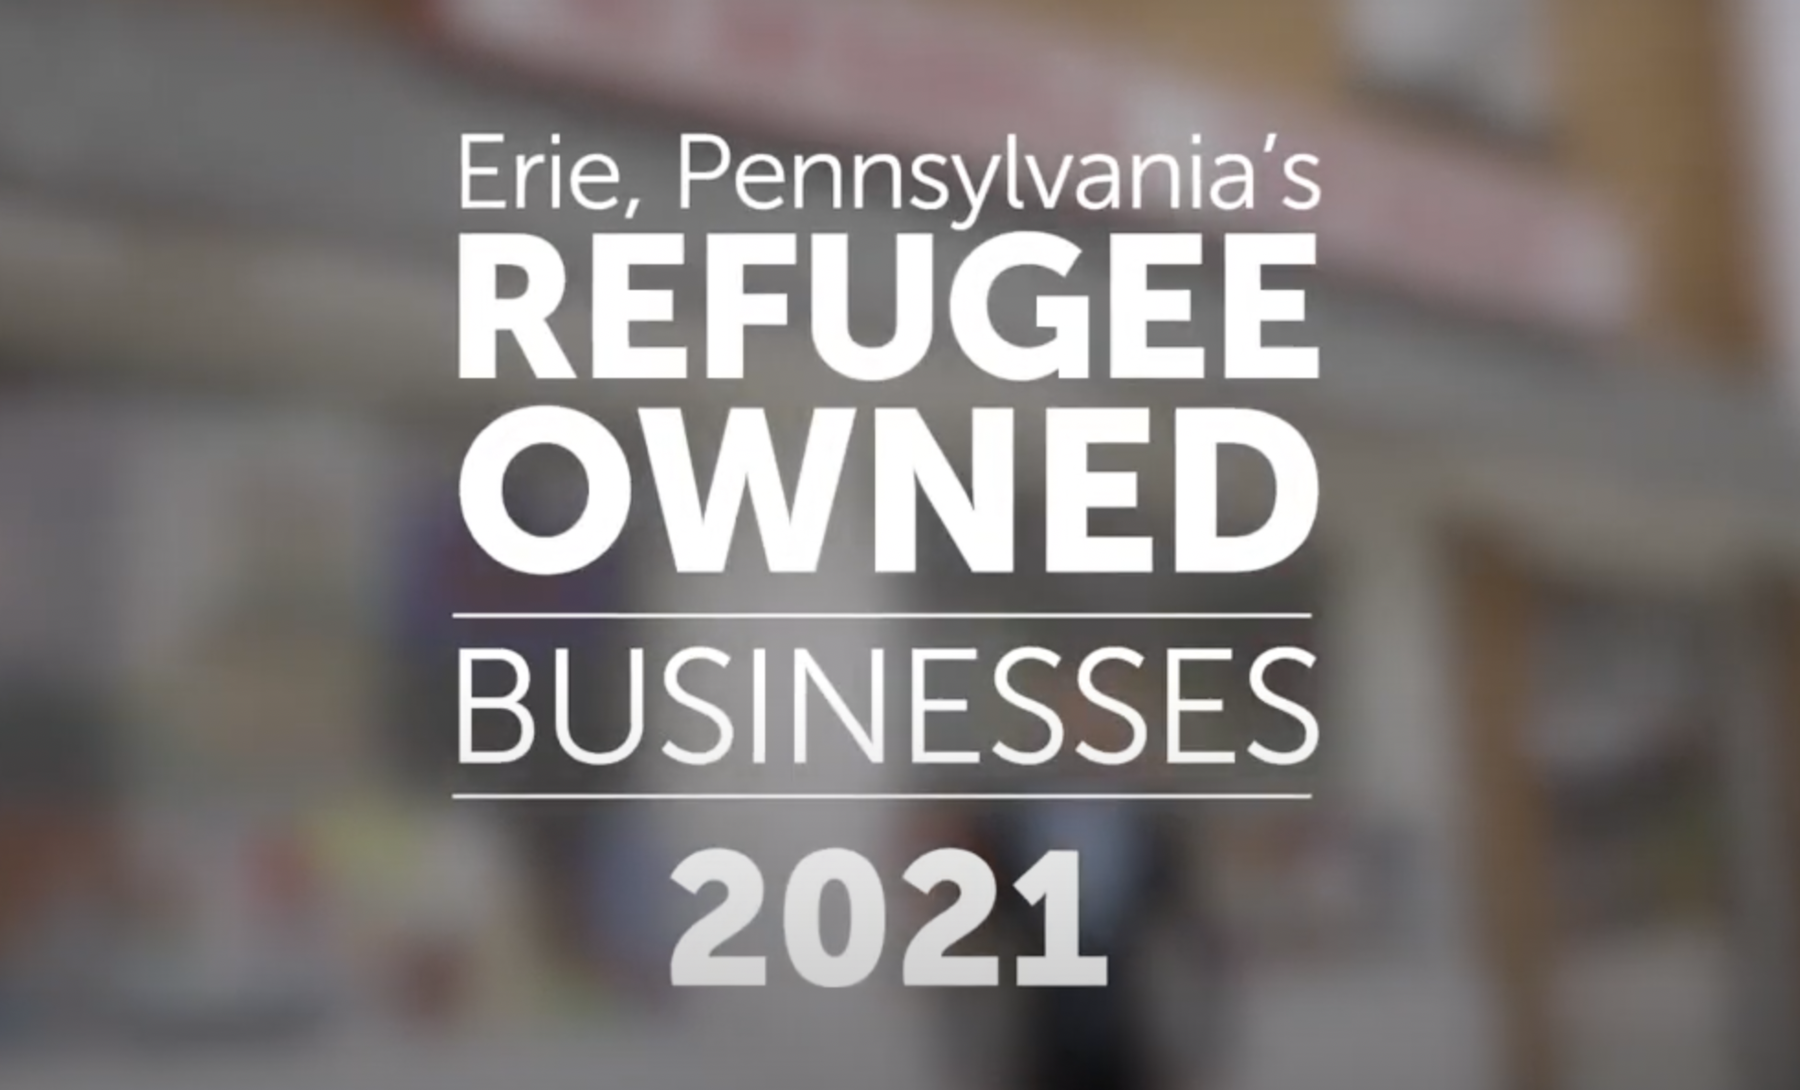 Erie Pennsylvania's Refugee Owned Businesses 2021